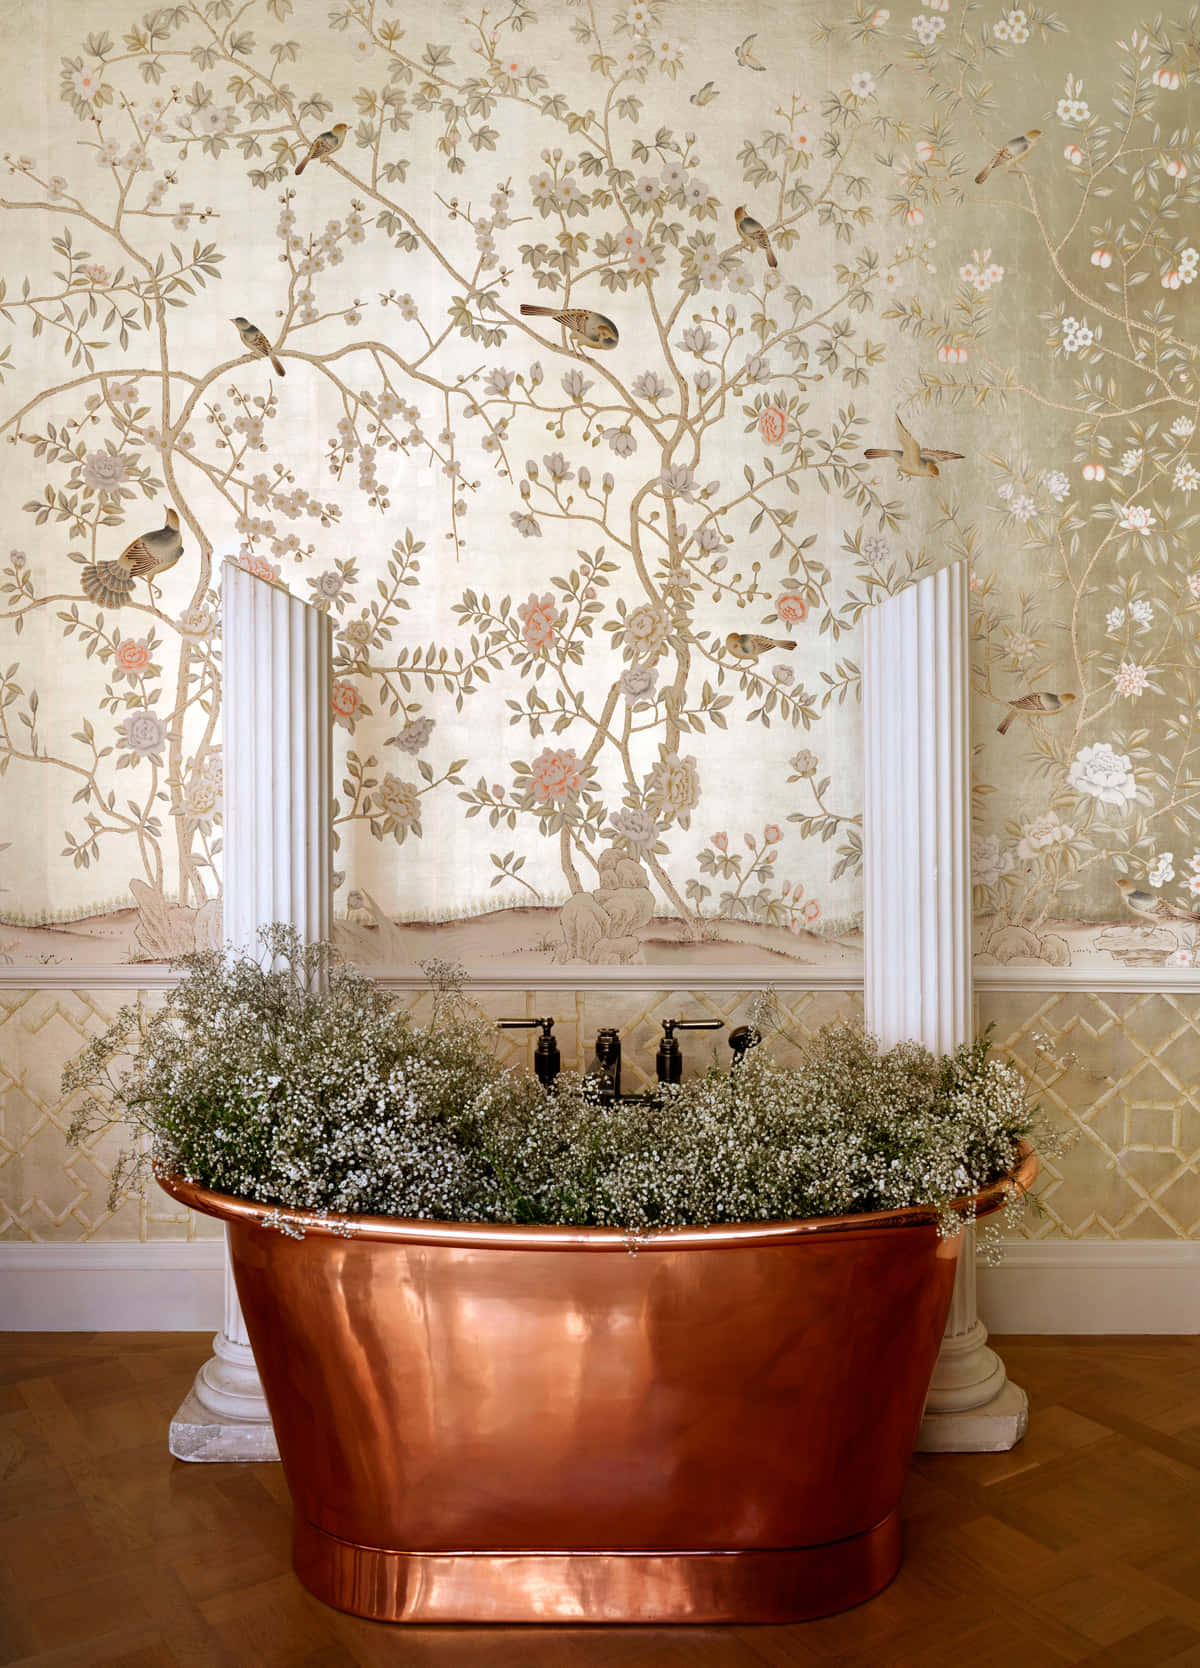 Flower Pot Against A Wall With Gilded Details Wallpaper